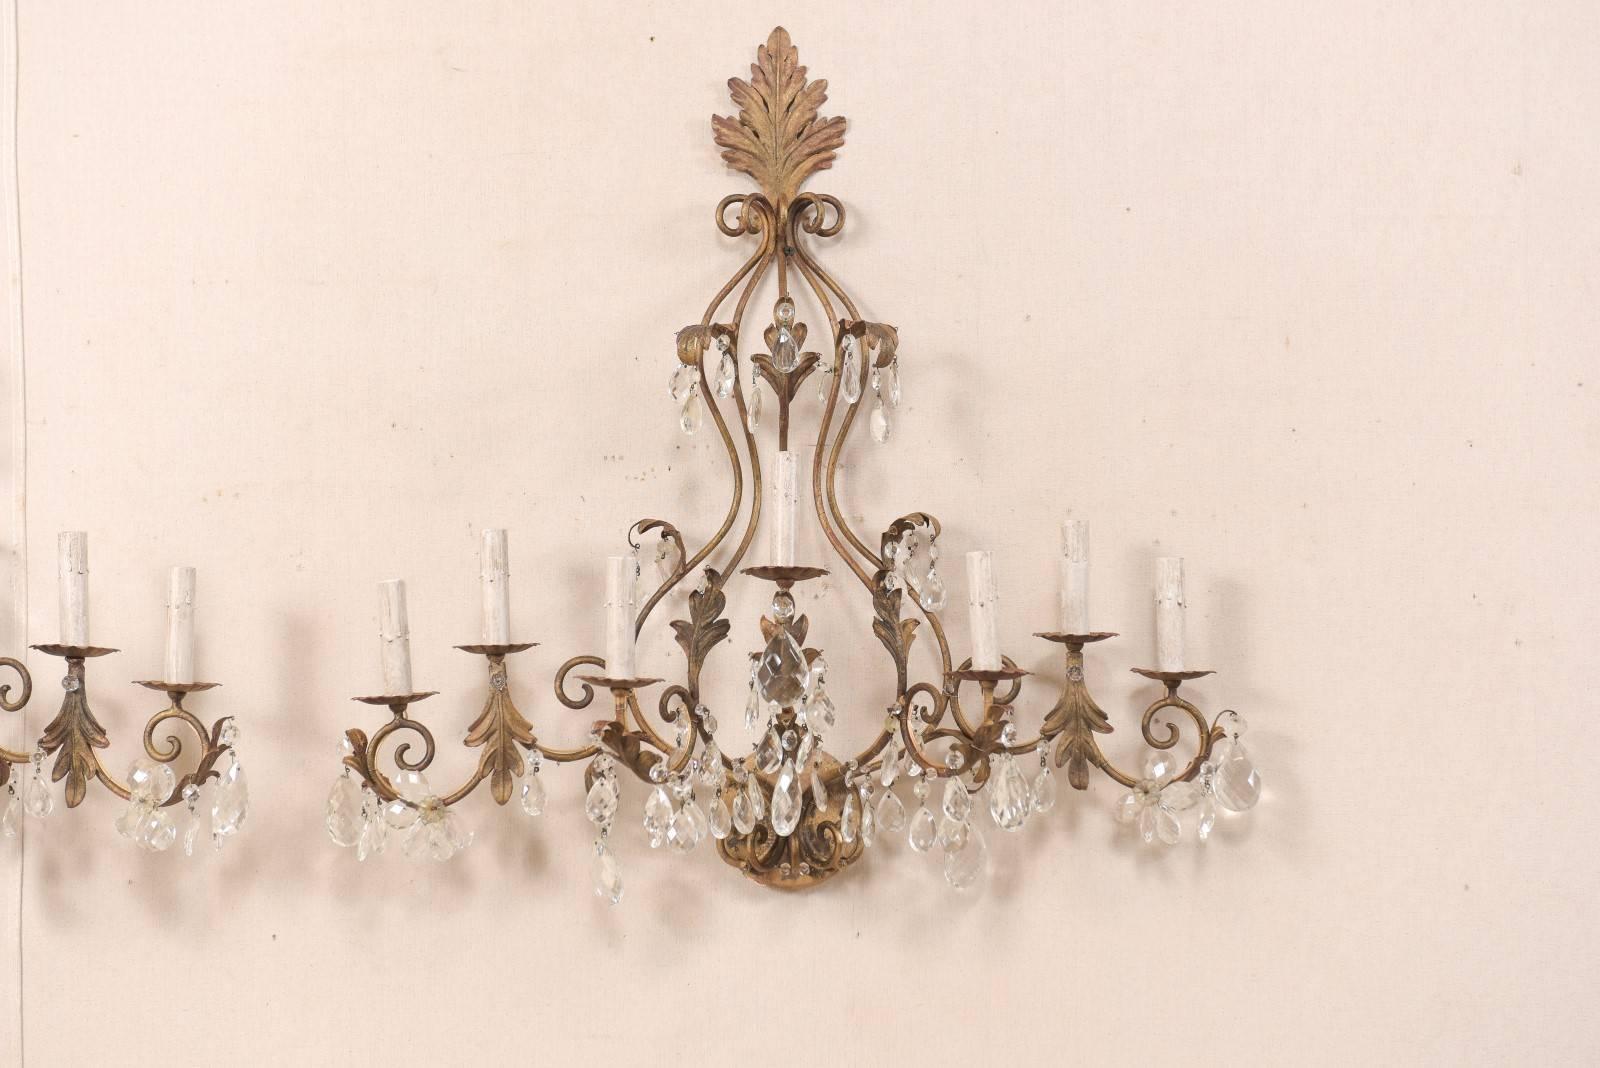 Pair of Mid-Century Seven-Light Crystal and Iron Sconces with Leaf Crest Tops In Good Condition For Sale In Atlanta, GA